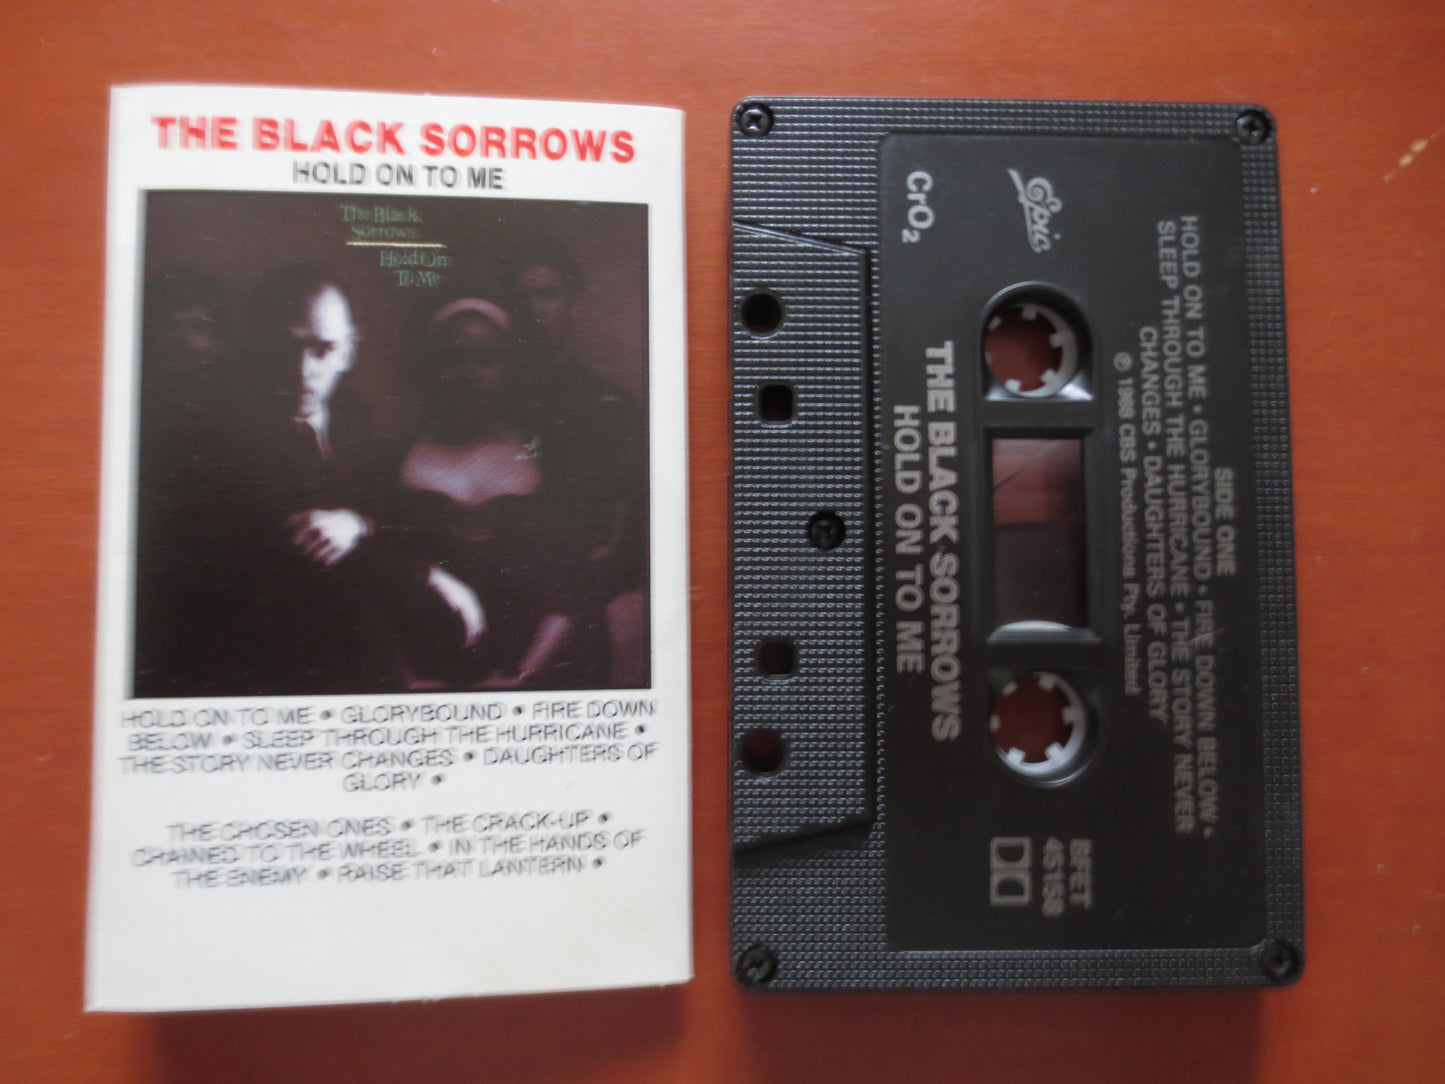 The BLACK SORROWS Tape, HOLD On To Me, The Black Sorrows, Tape Cassette, Rock Cassette, Rock Song, Rock Tape, 1988 Cassette